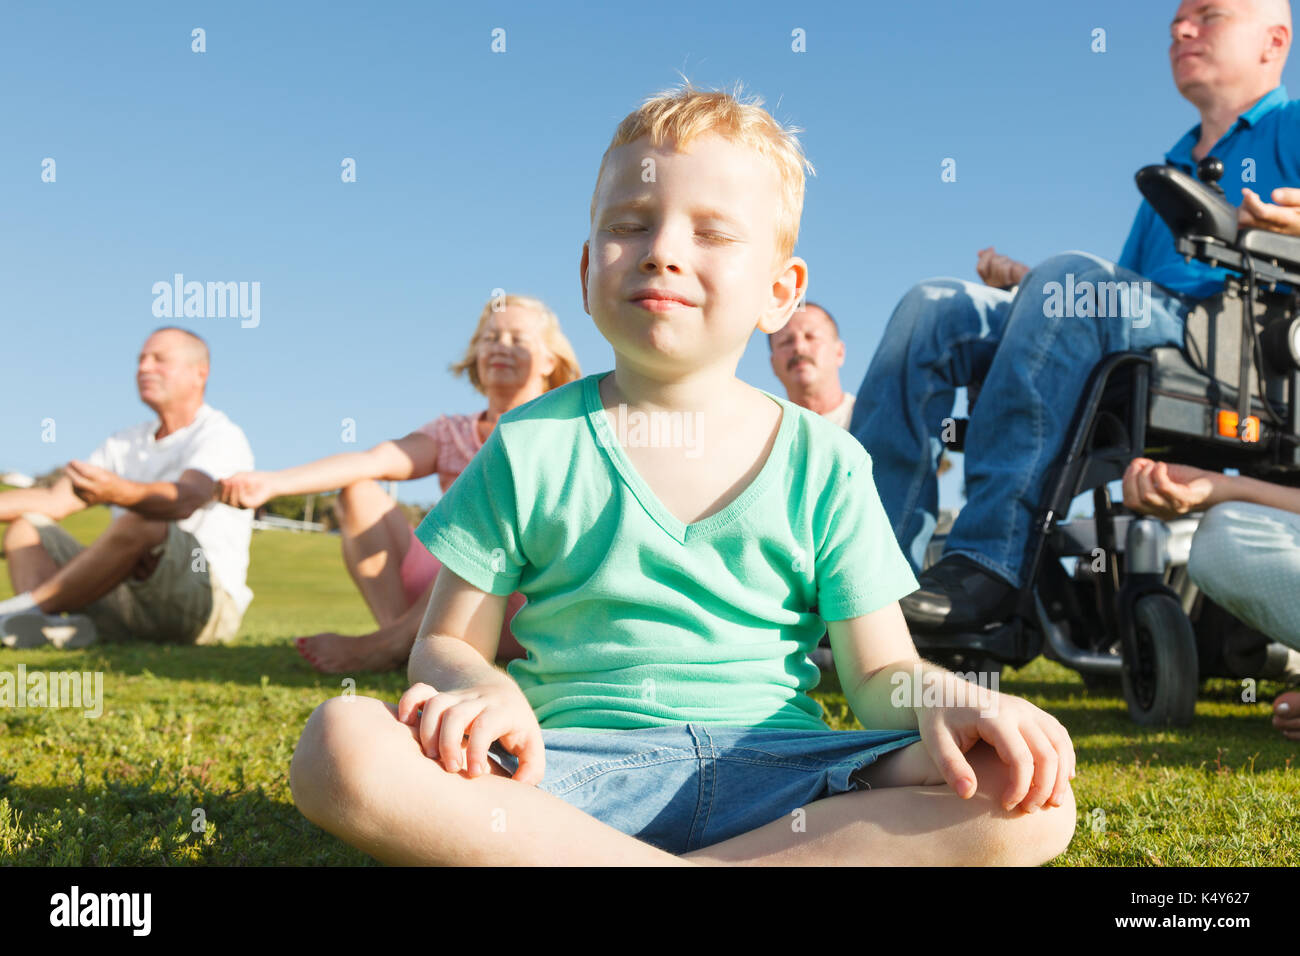 Child and group of people with disabled man practicing yoga. Stock Photo